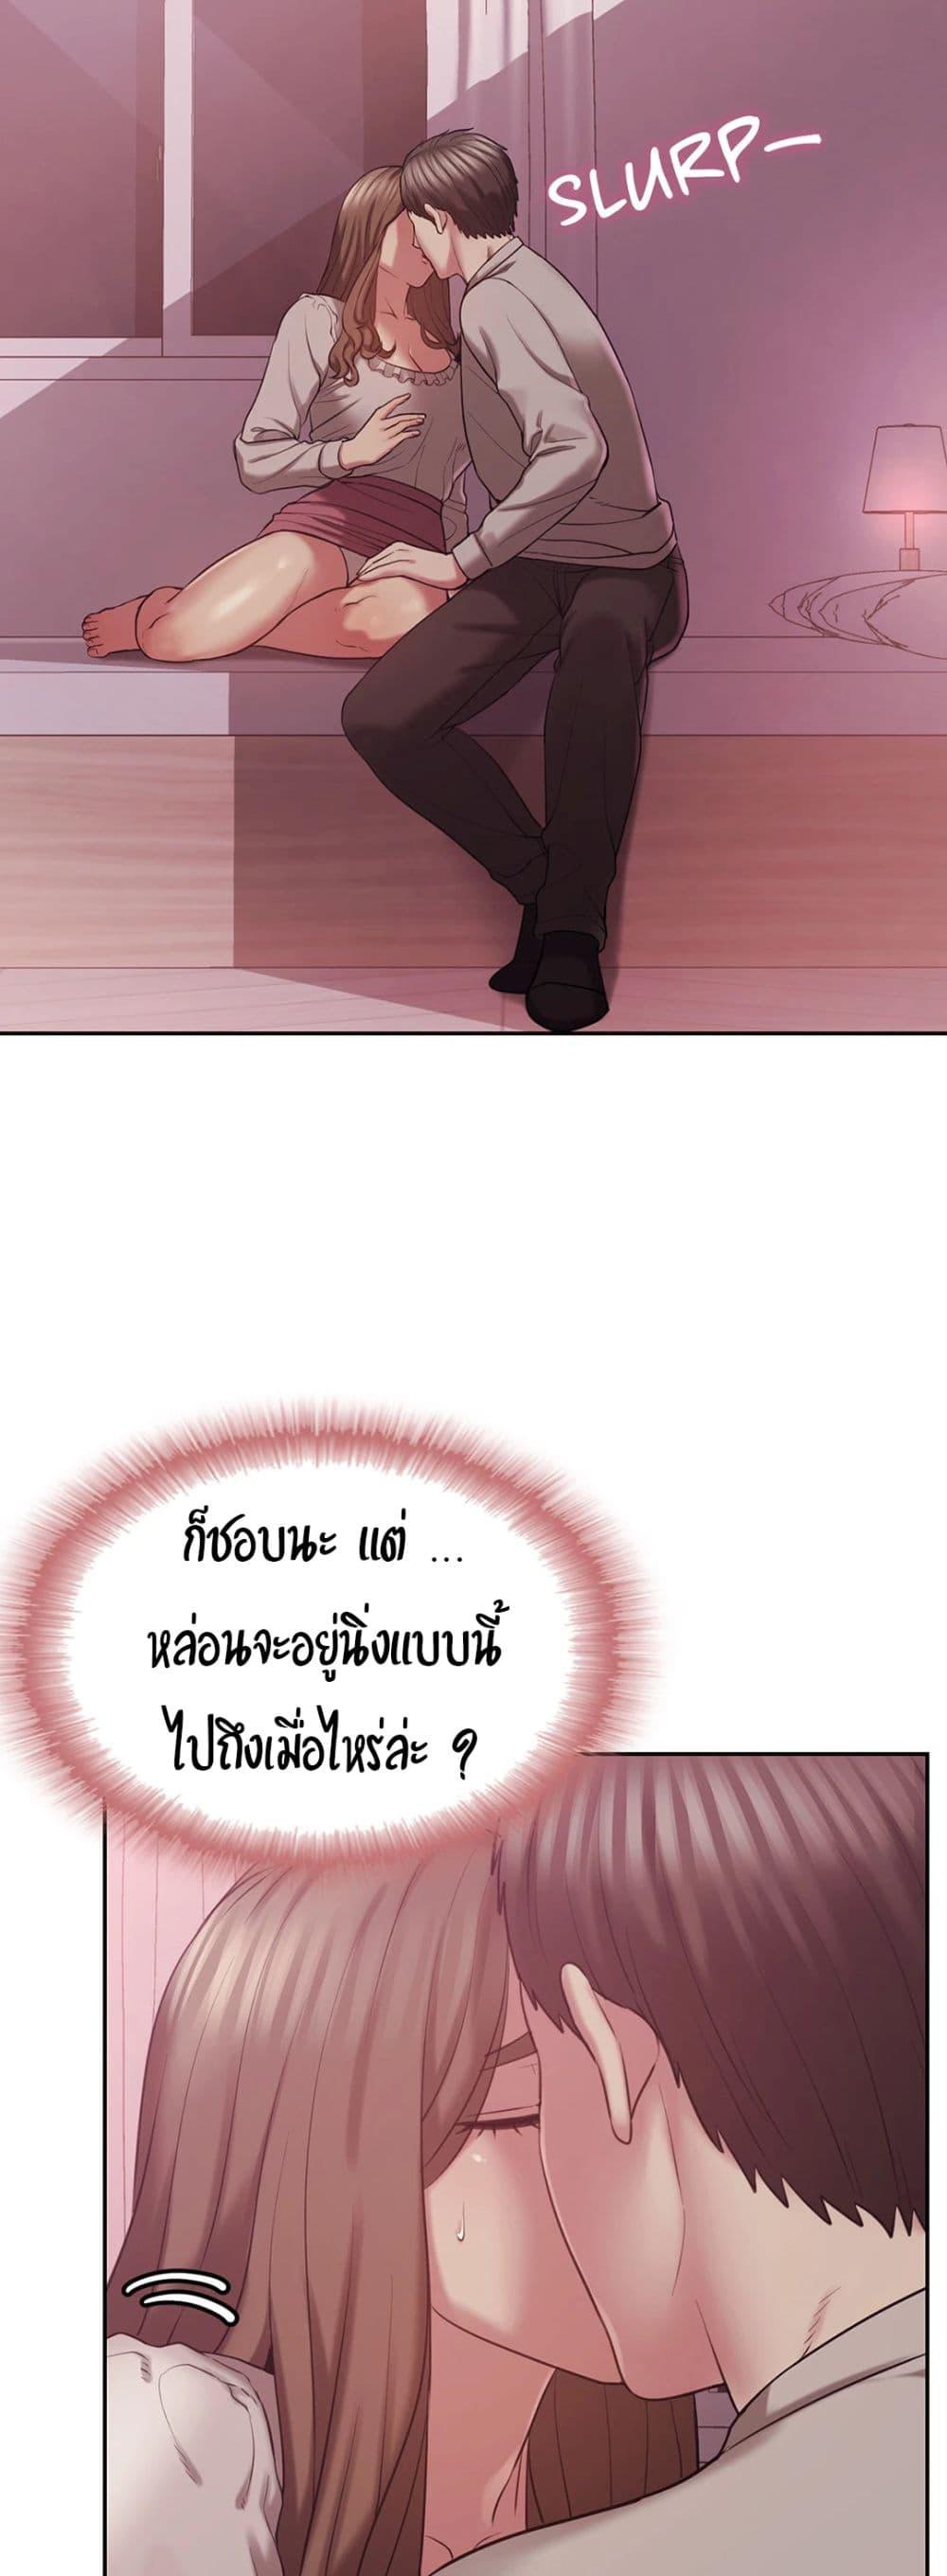 Sexual Consulting 1 ภาพ 16